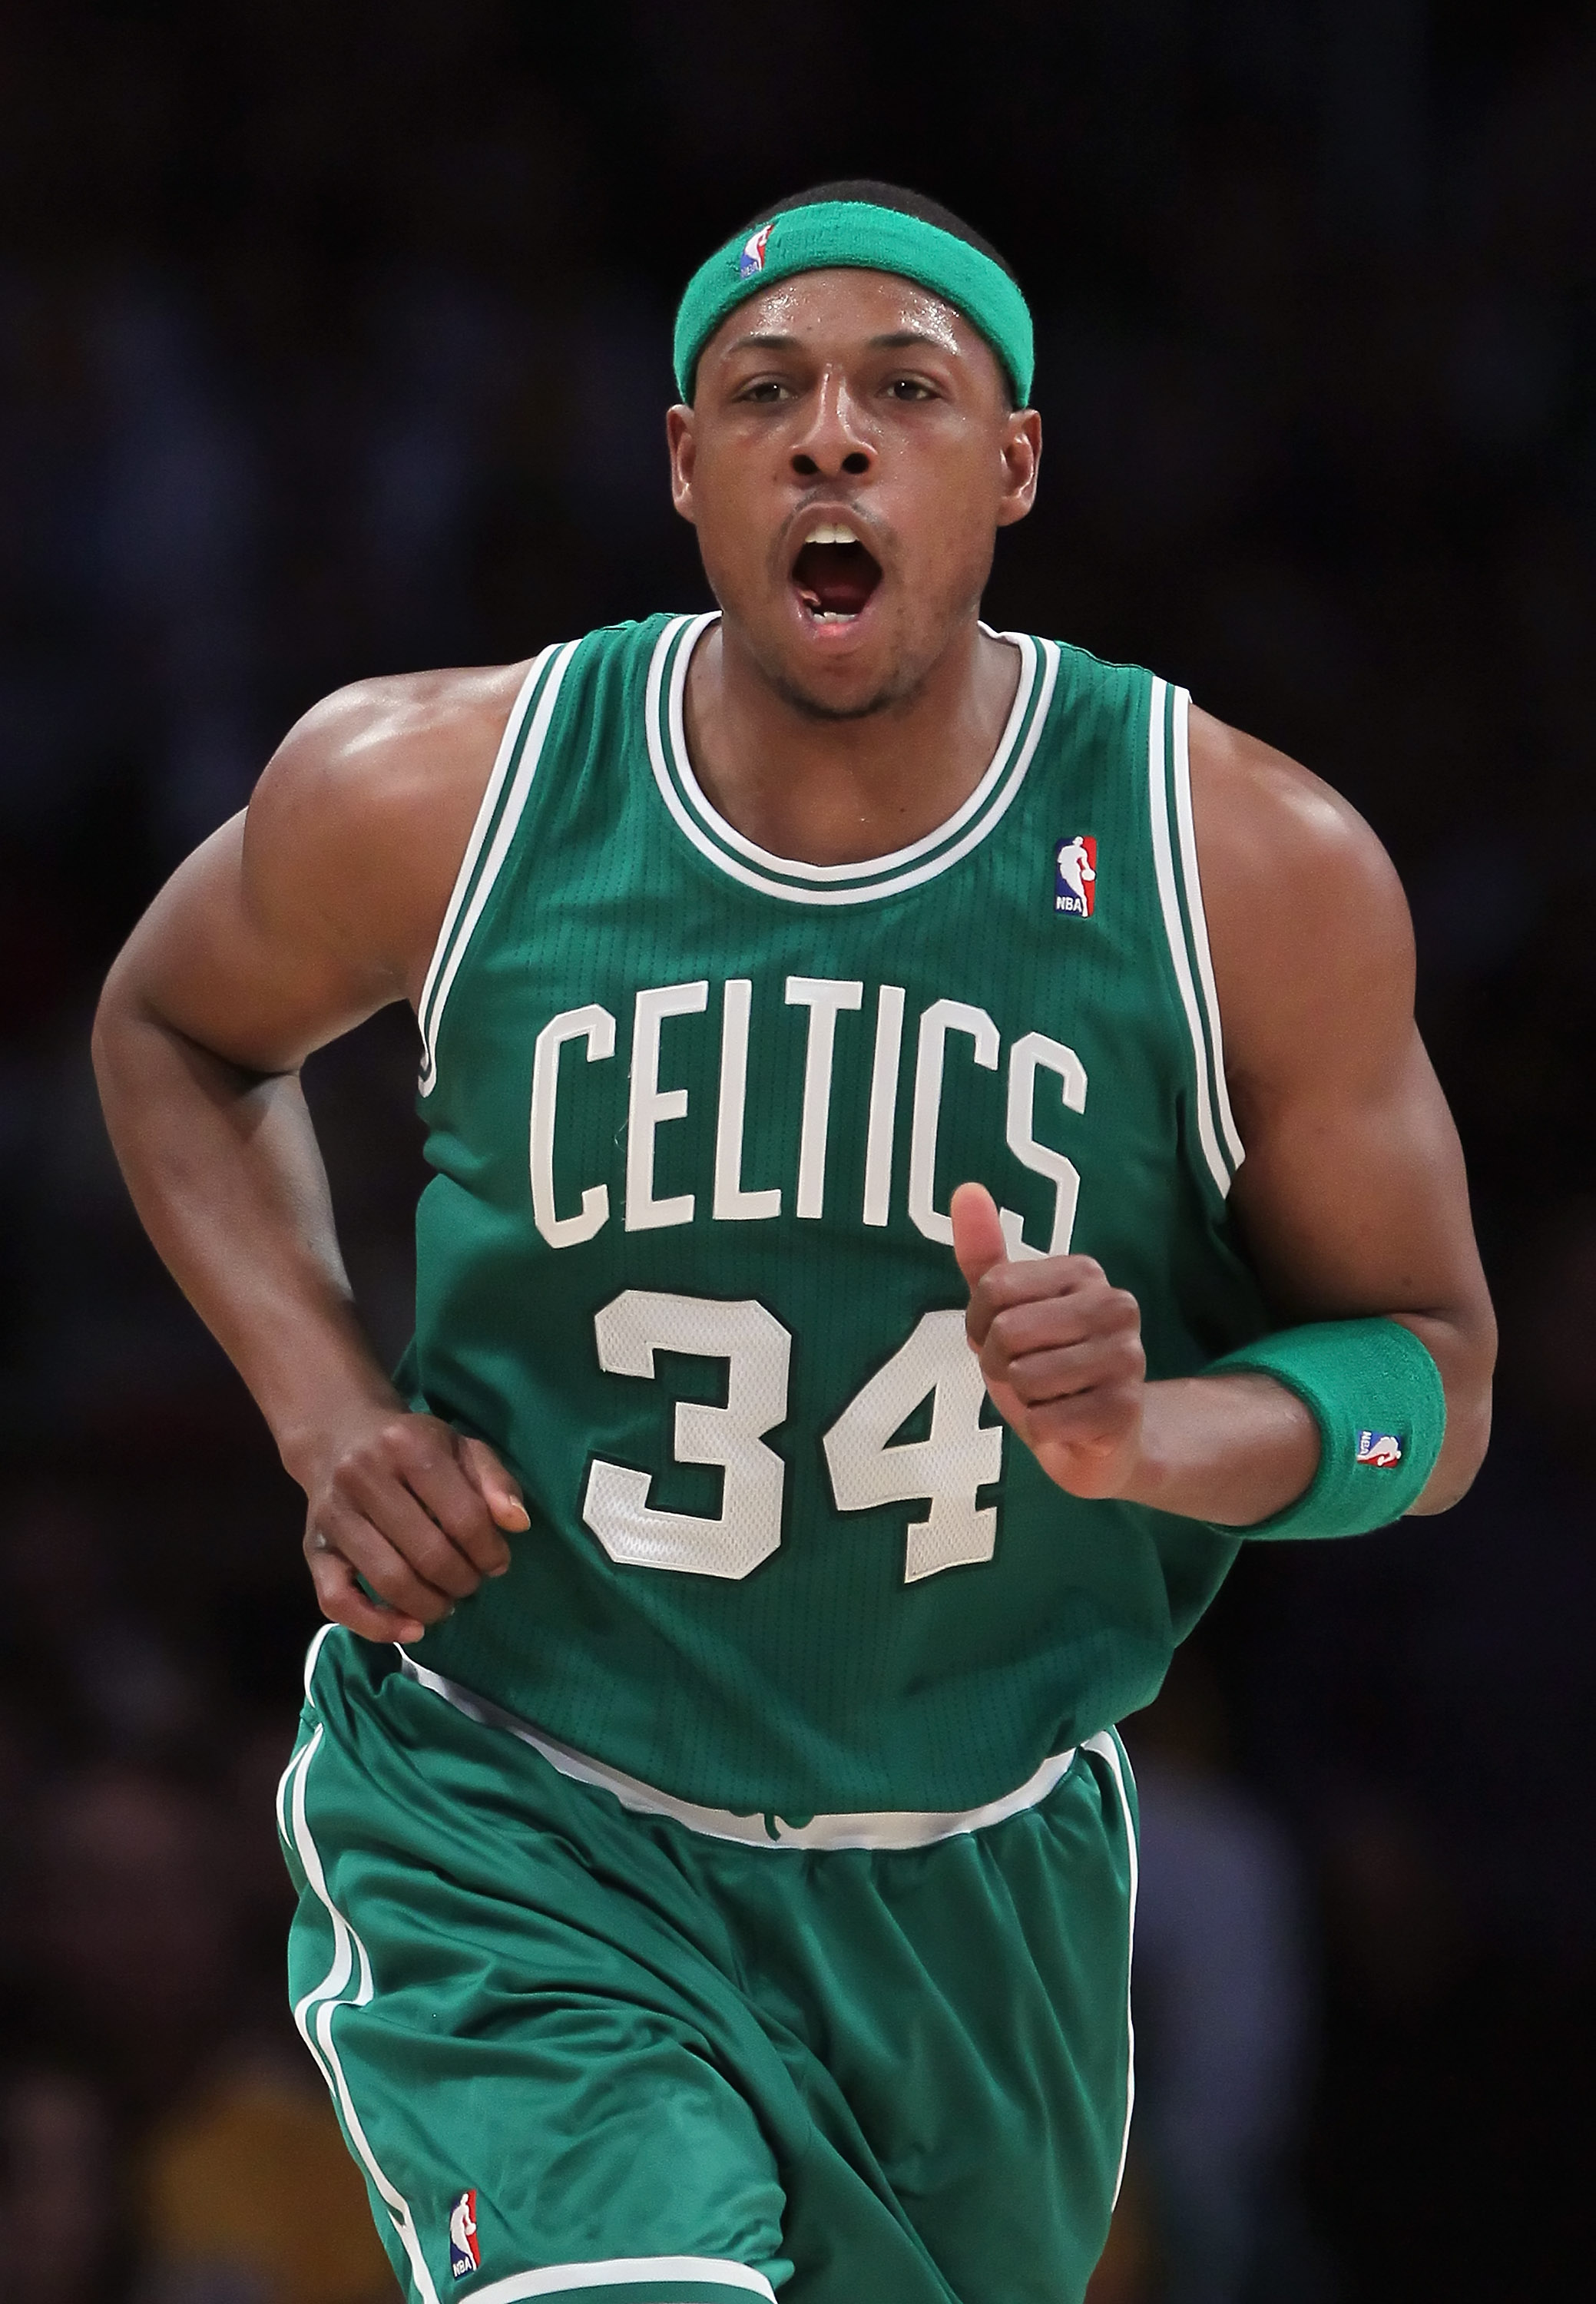 LOS ANGELES, CA - JANUARY 30:  Paul Pierce #34 of the Boston Celtics yells after scoring a basket against the Los Angeles Lakers in the first half at Staples Center on January 30, 2011 in Los Angeles, California. The Celtics defeated the Lakers 109-96.  (